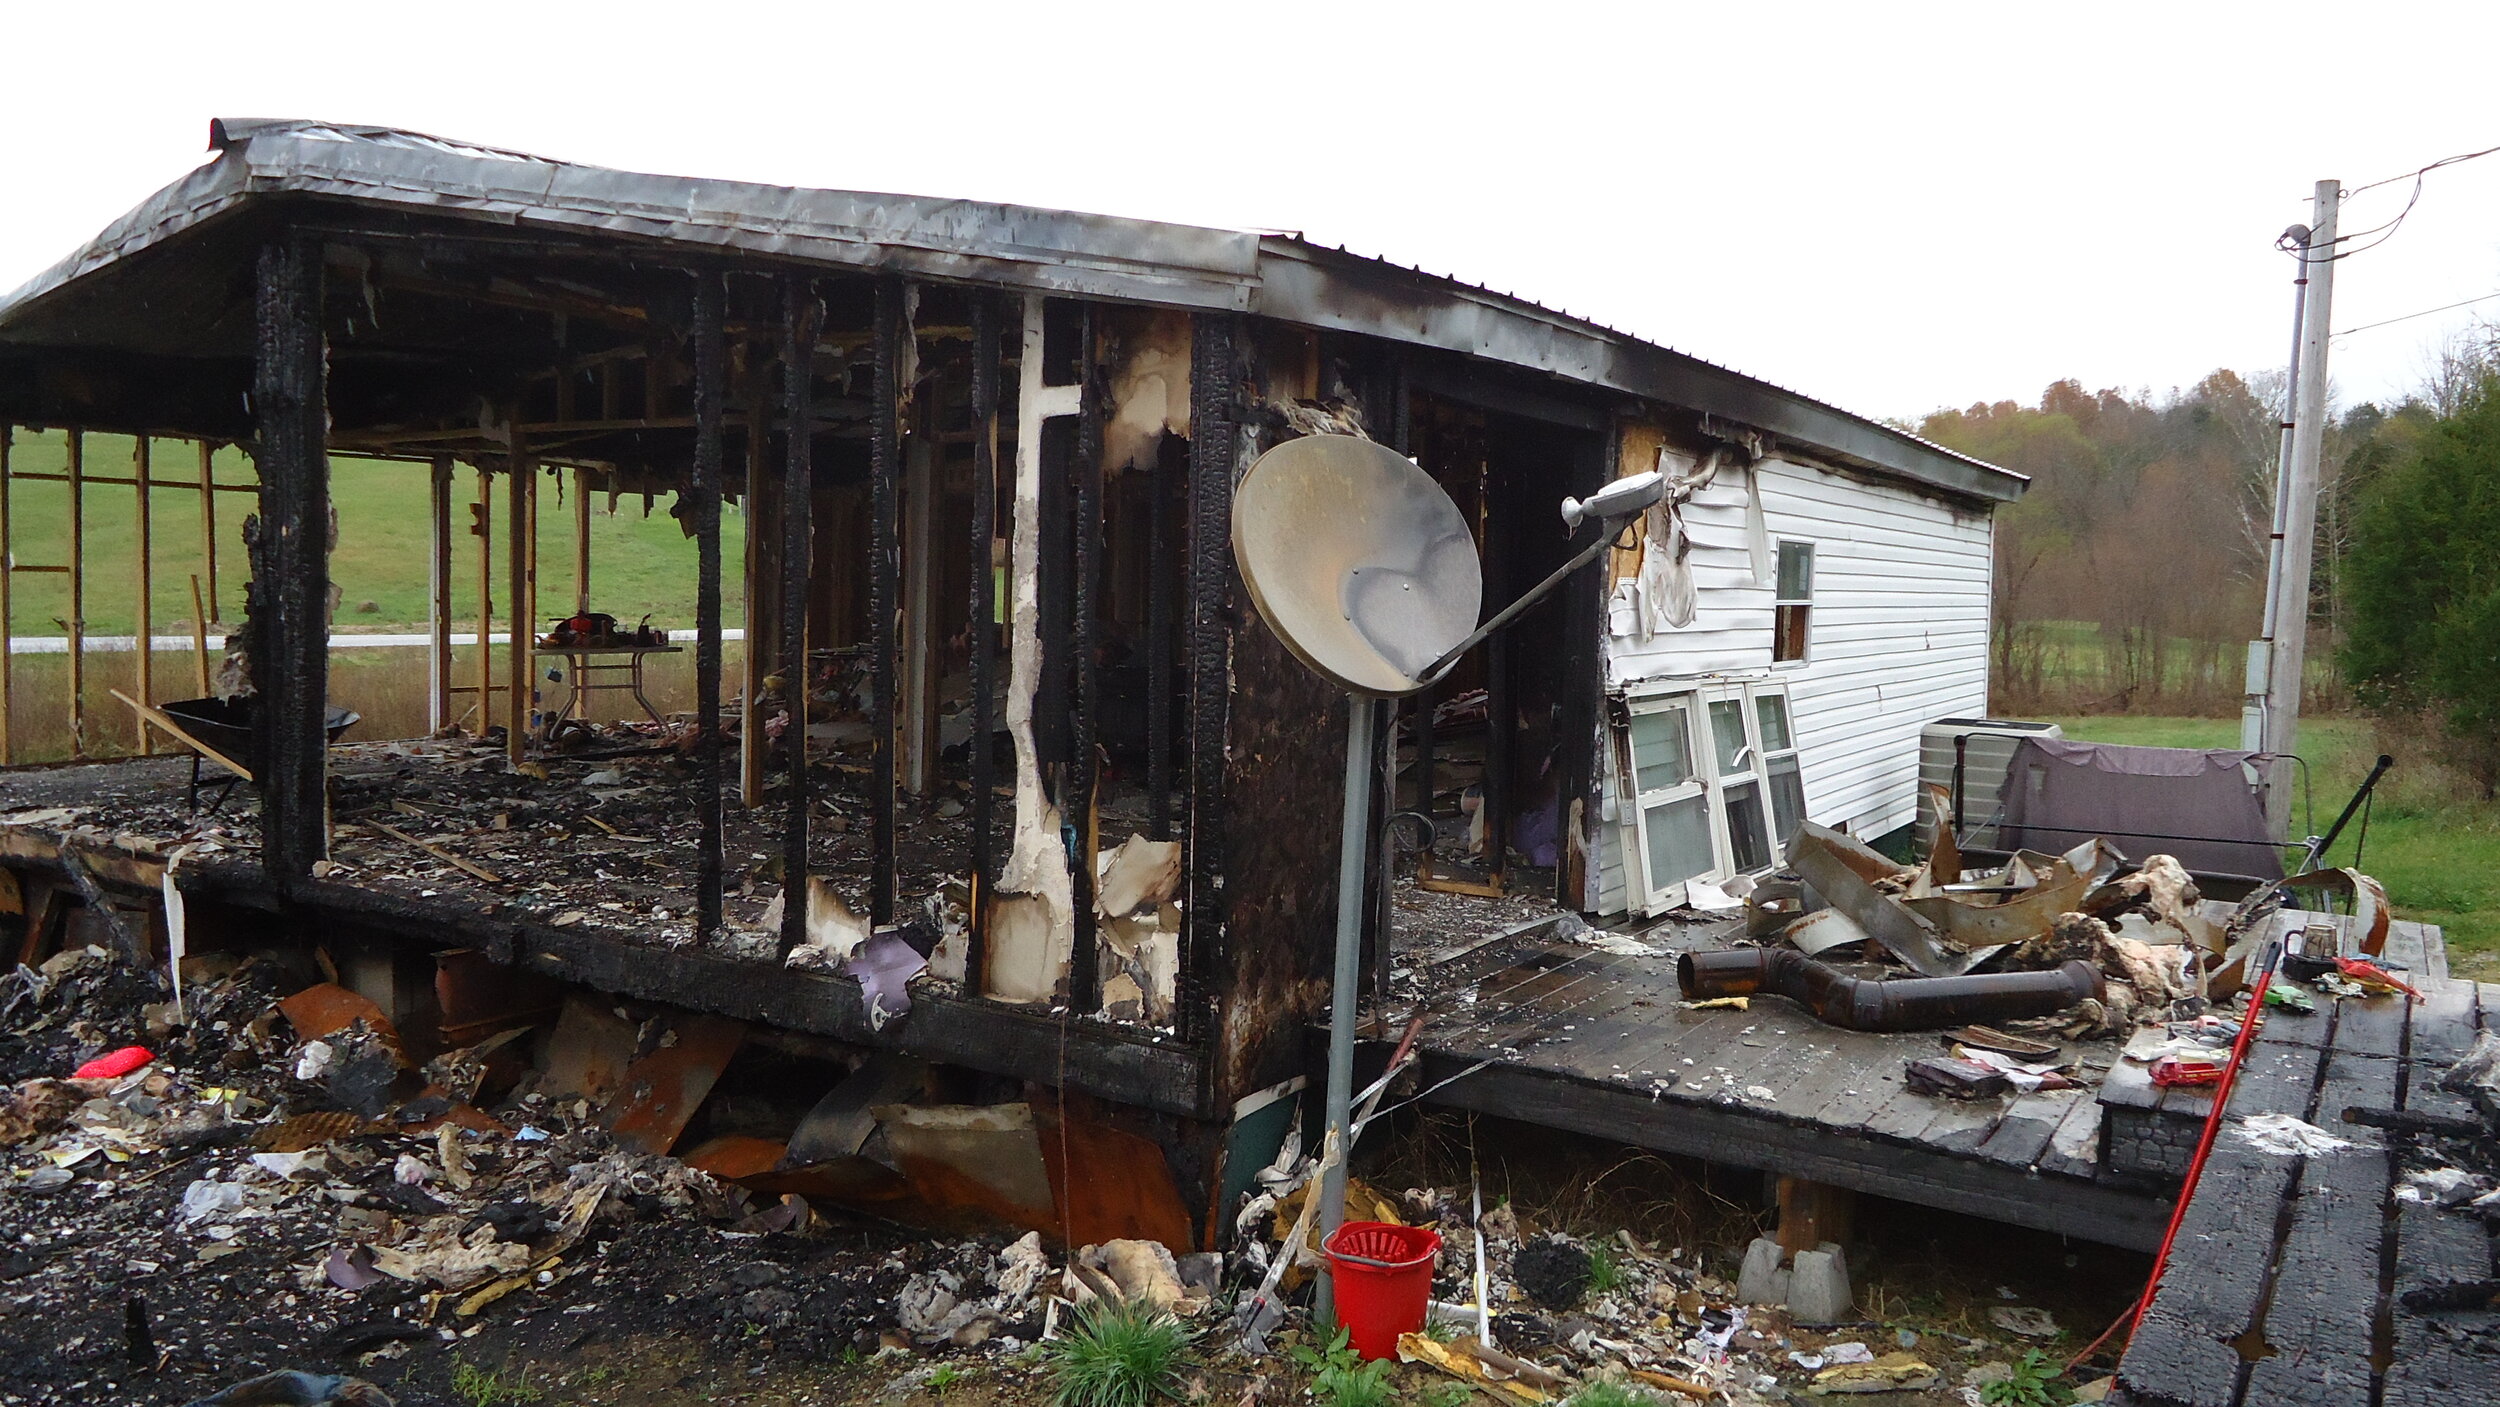 Insurance claim, Fire loss, fire damage, residential insurance claim